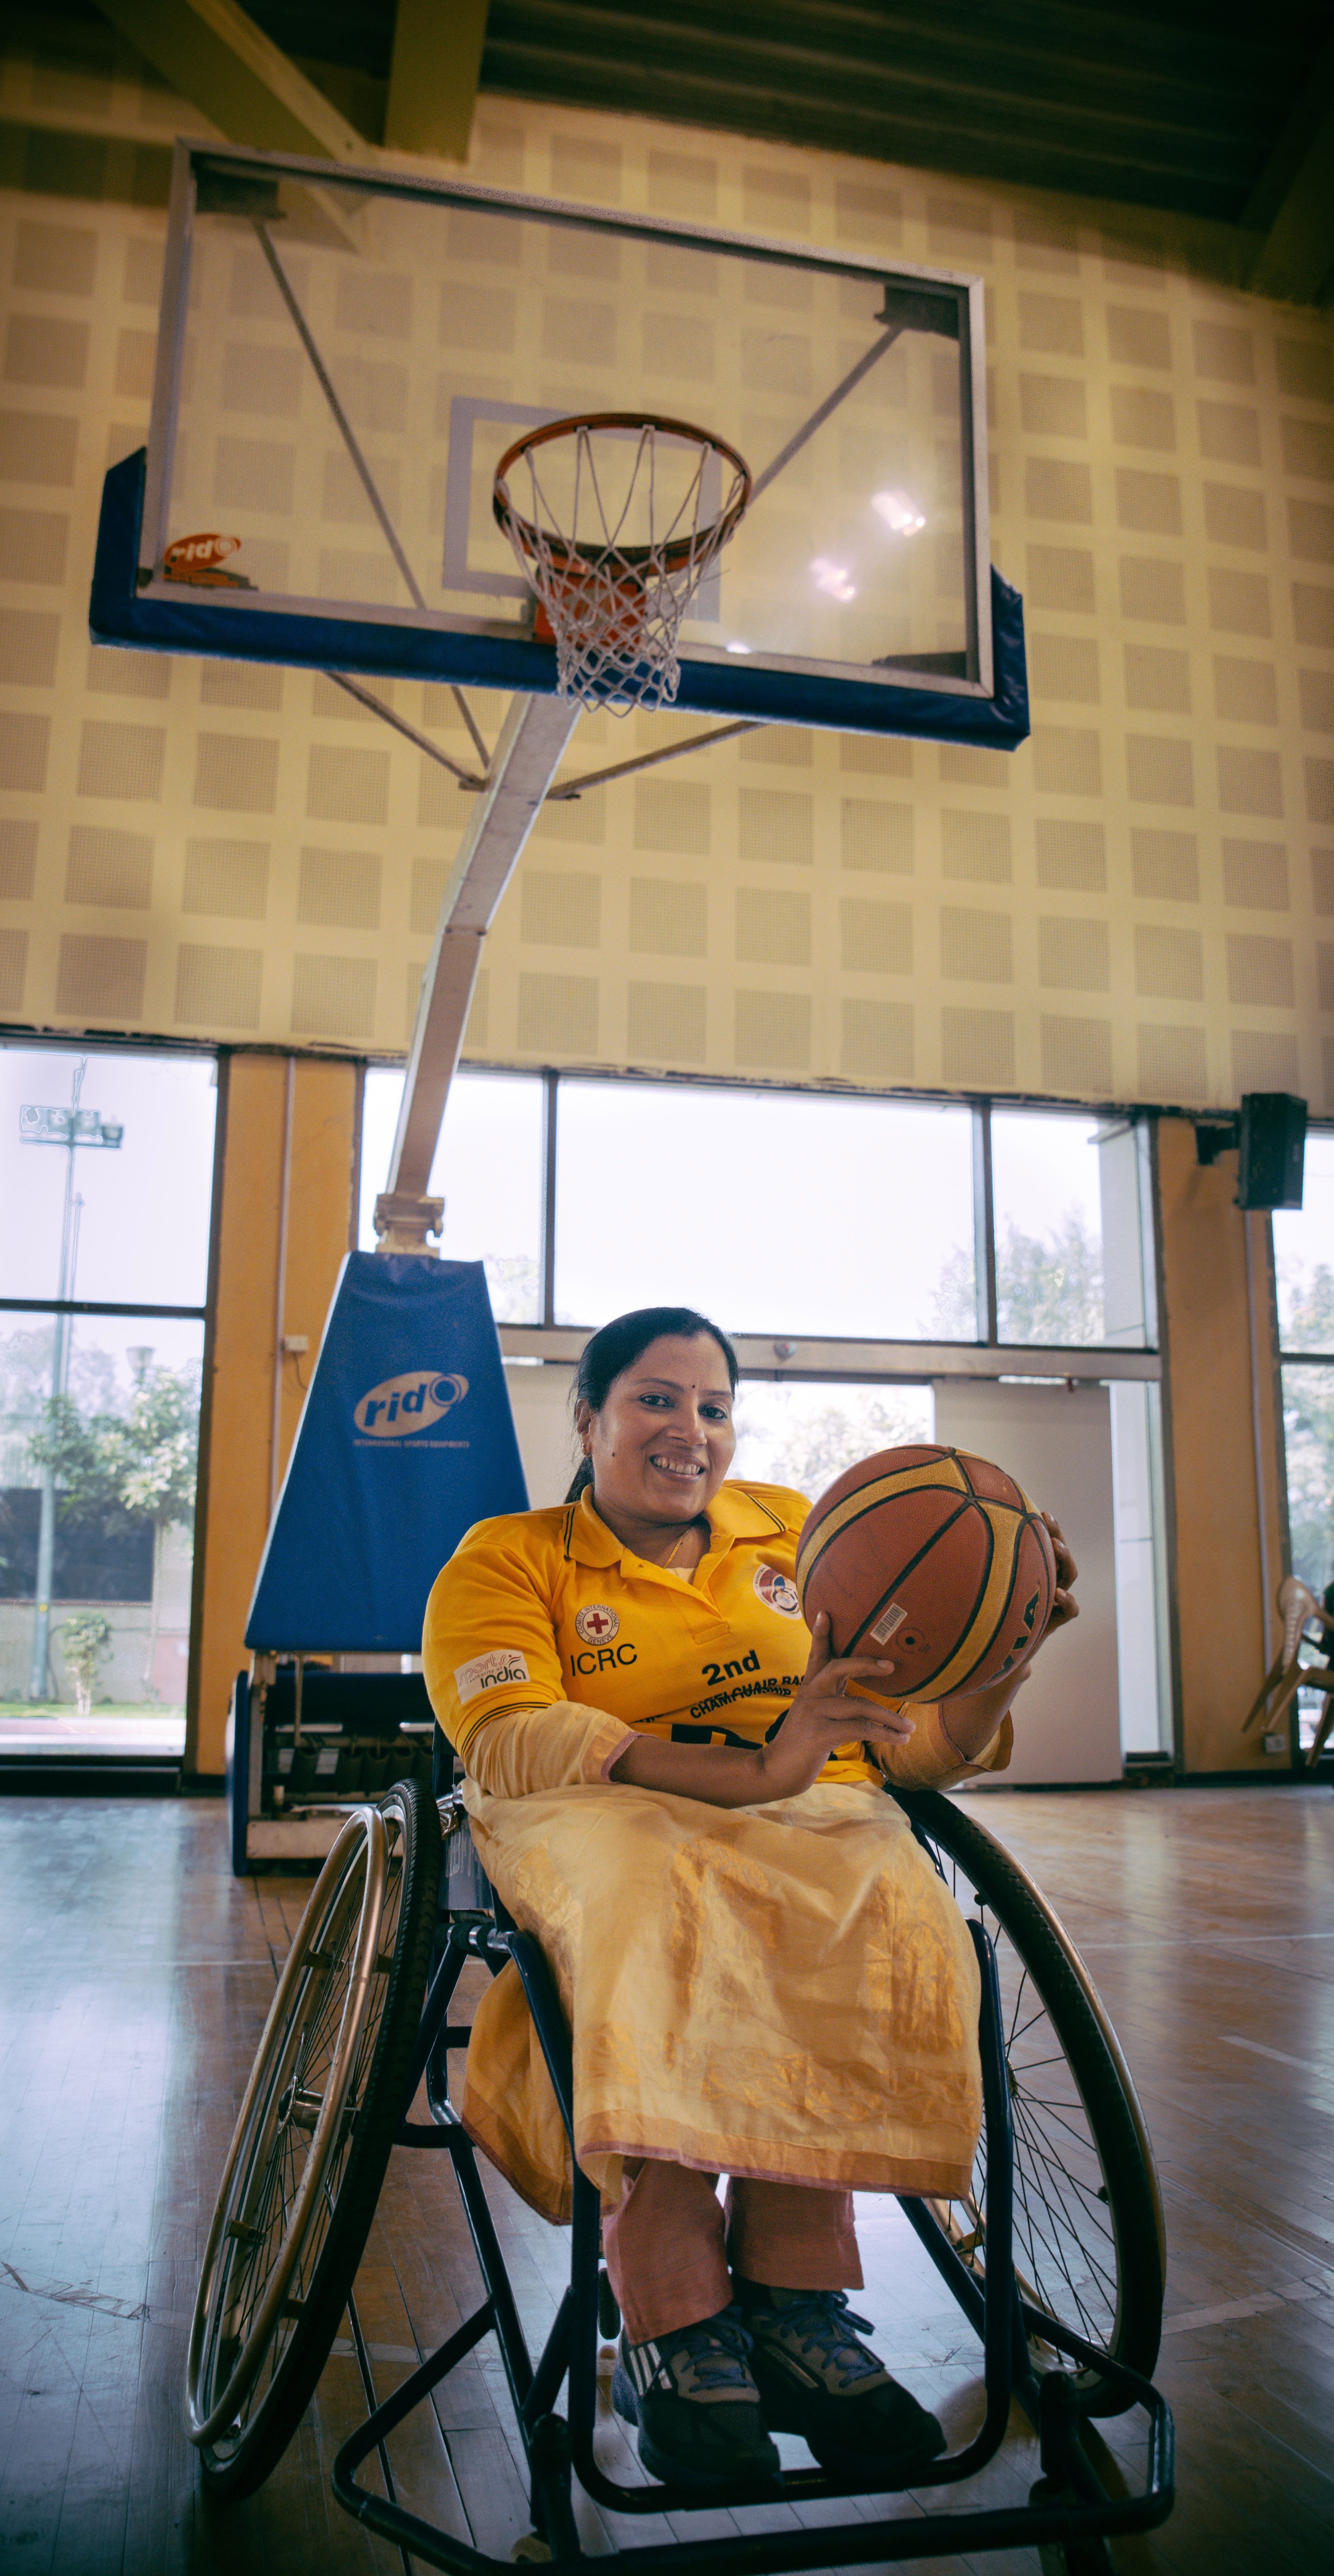 Madhavi poses with the basketball before her first game as a wheelchair basketball player.